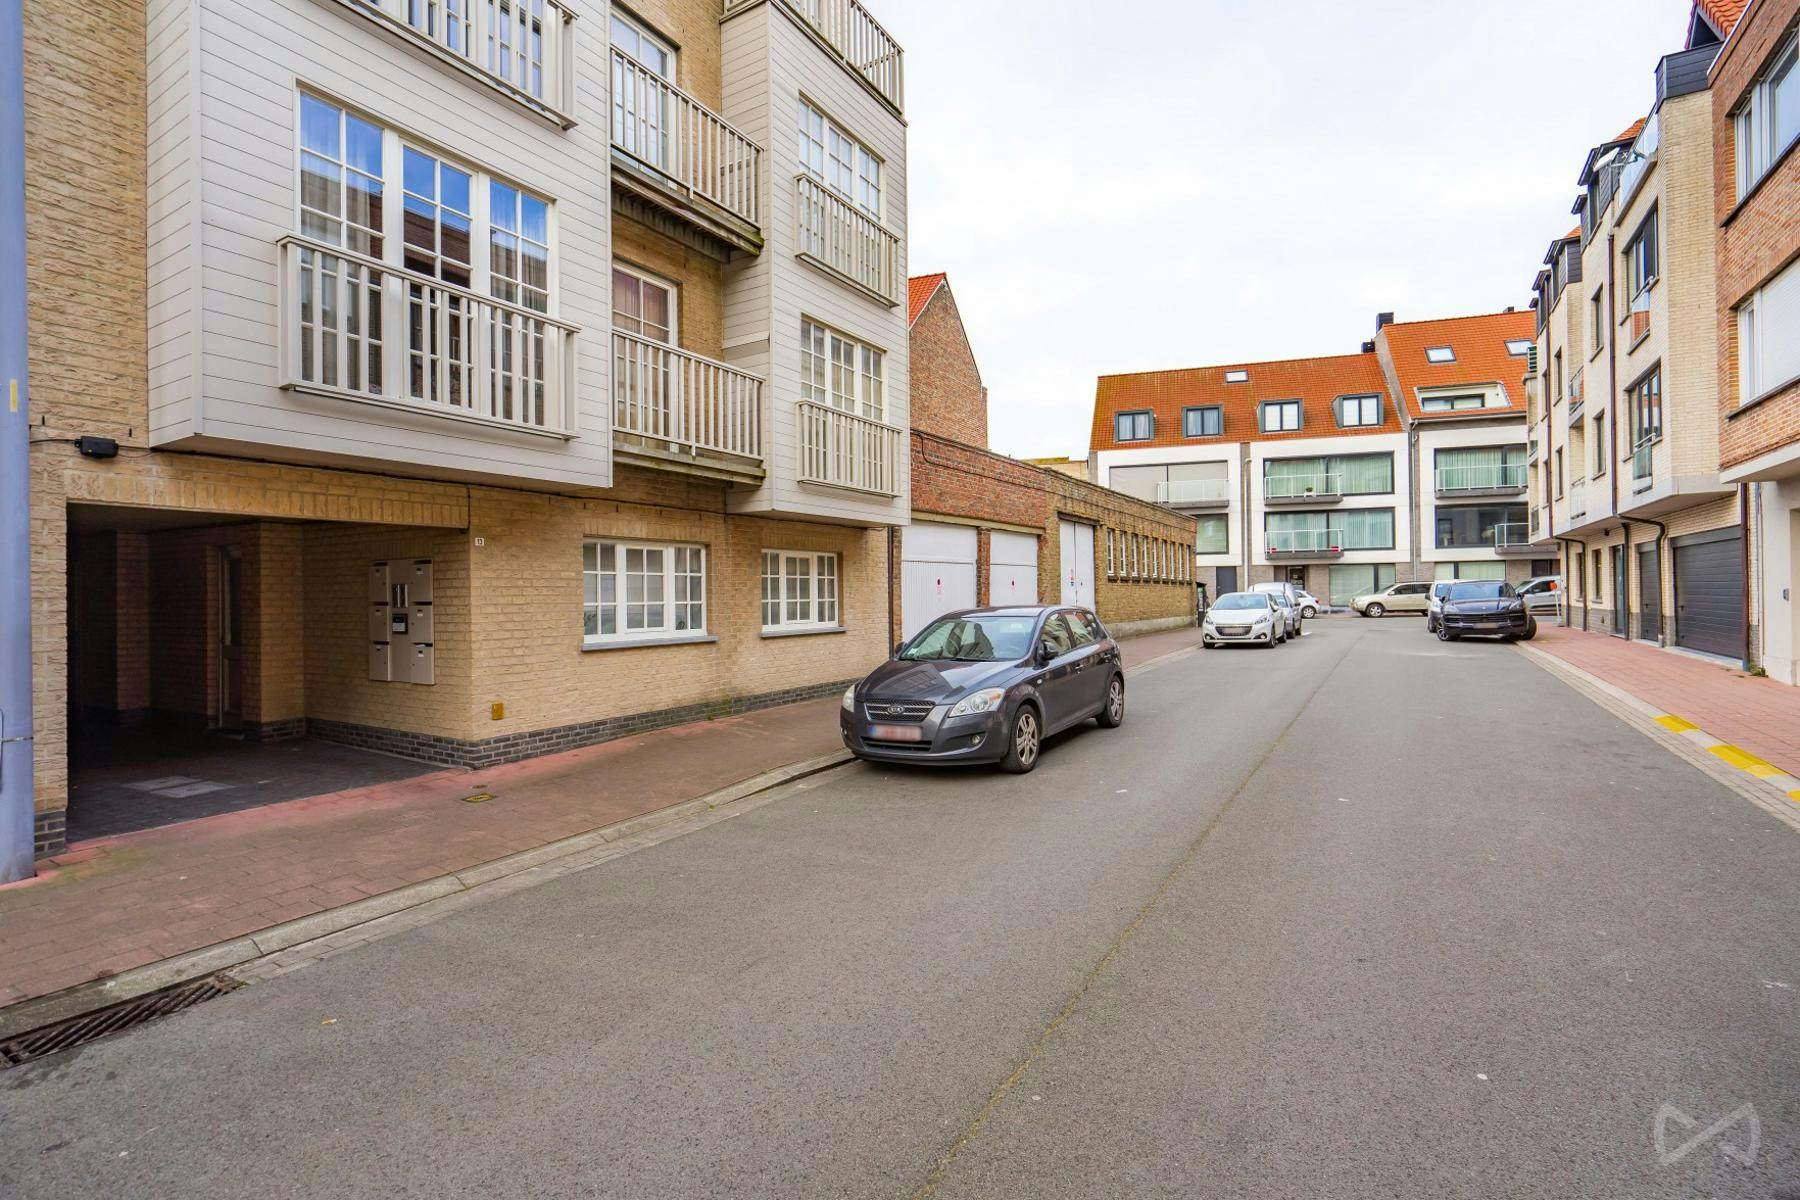 Picture 3 of 4 for Flat with one bedroom in KNOKKE-HEIST